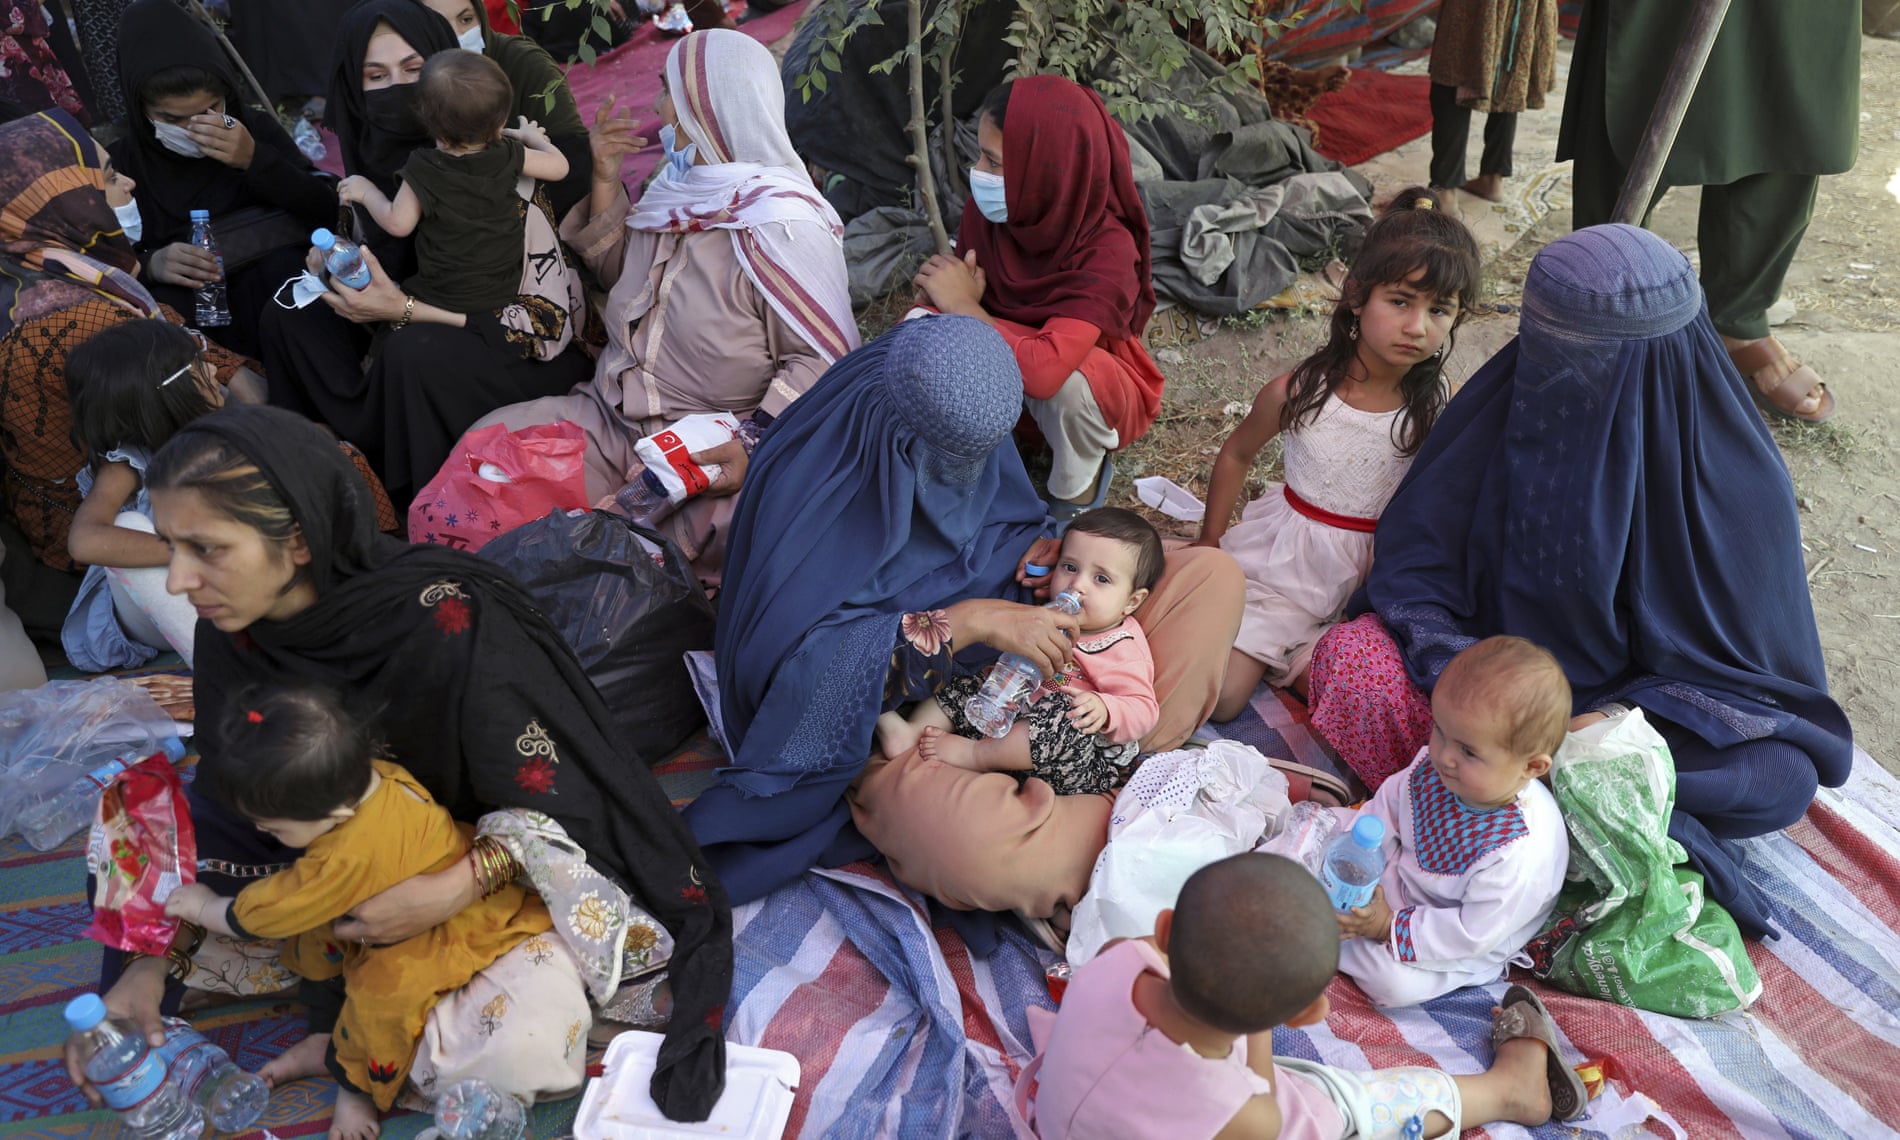 Mothers and children displaced by fighting in the northern provinces camped in a Kabul park.